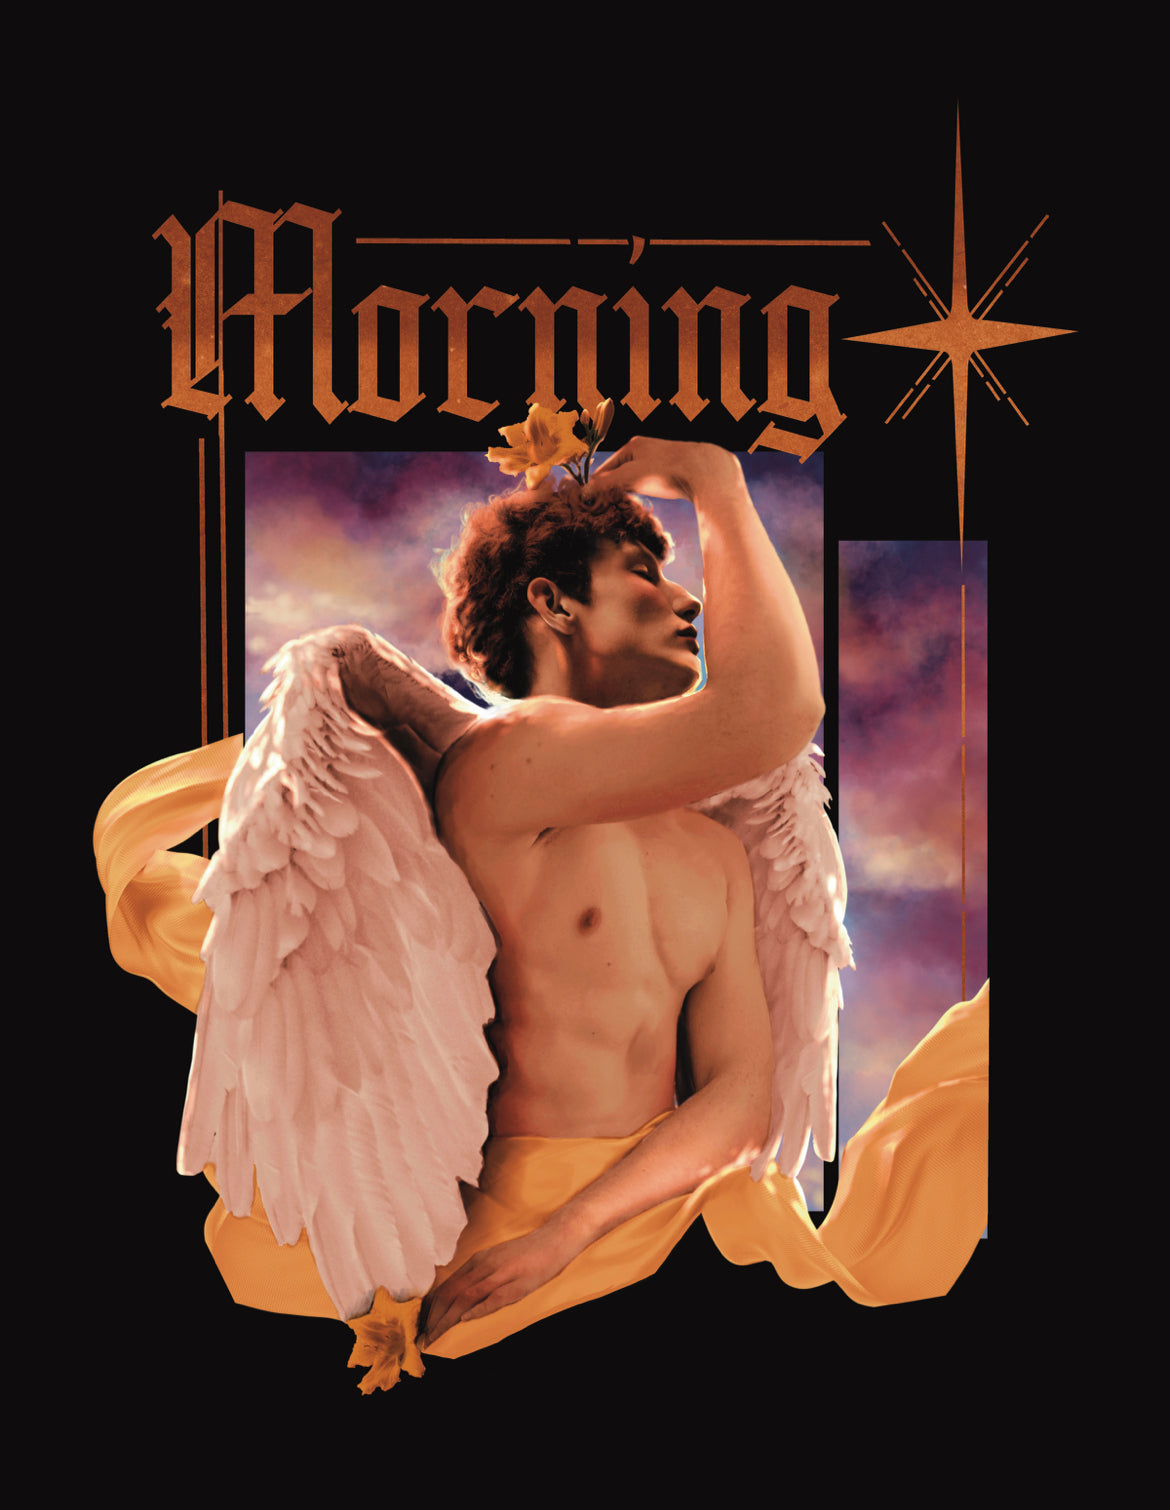 Morning Star Graphic Tee